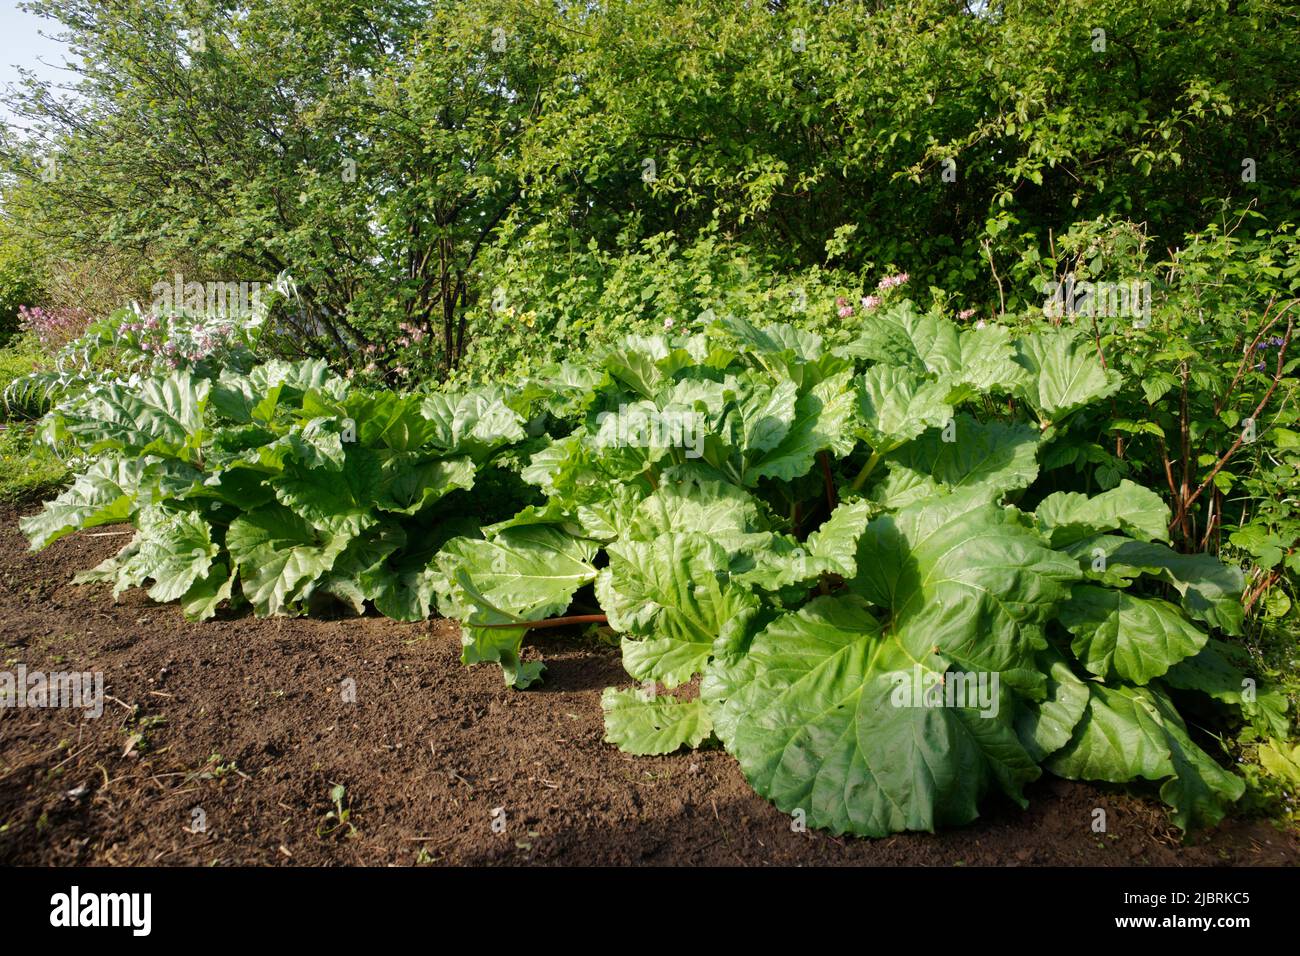 Tufts of rhubarb in a vegetable garden Stock Photo